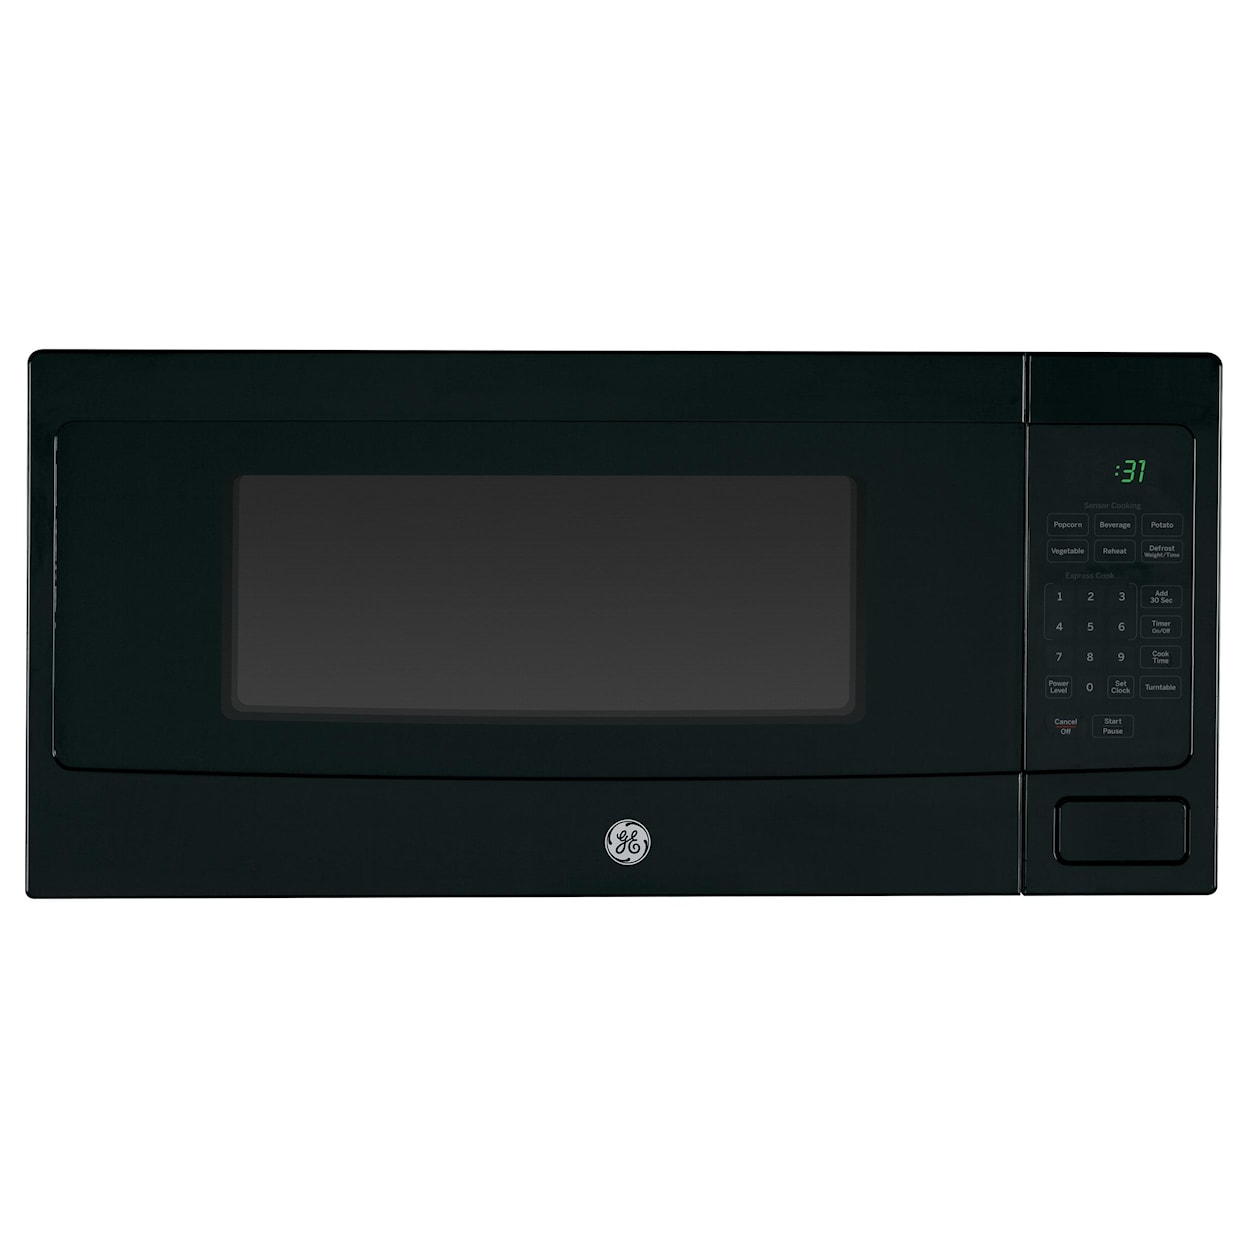 GE Appliances Microwaves  1.1 Cu. Ft. Countertop Microwave Oven